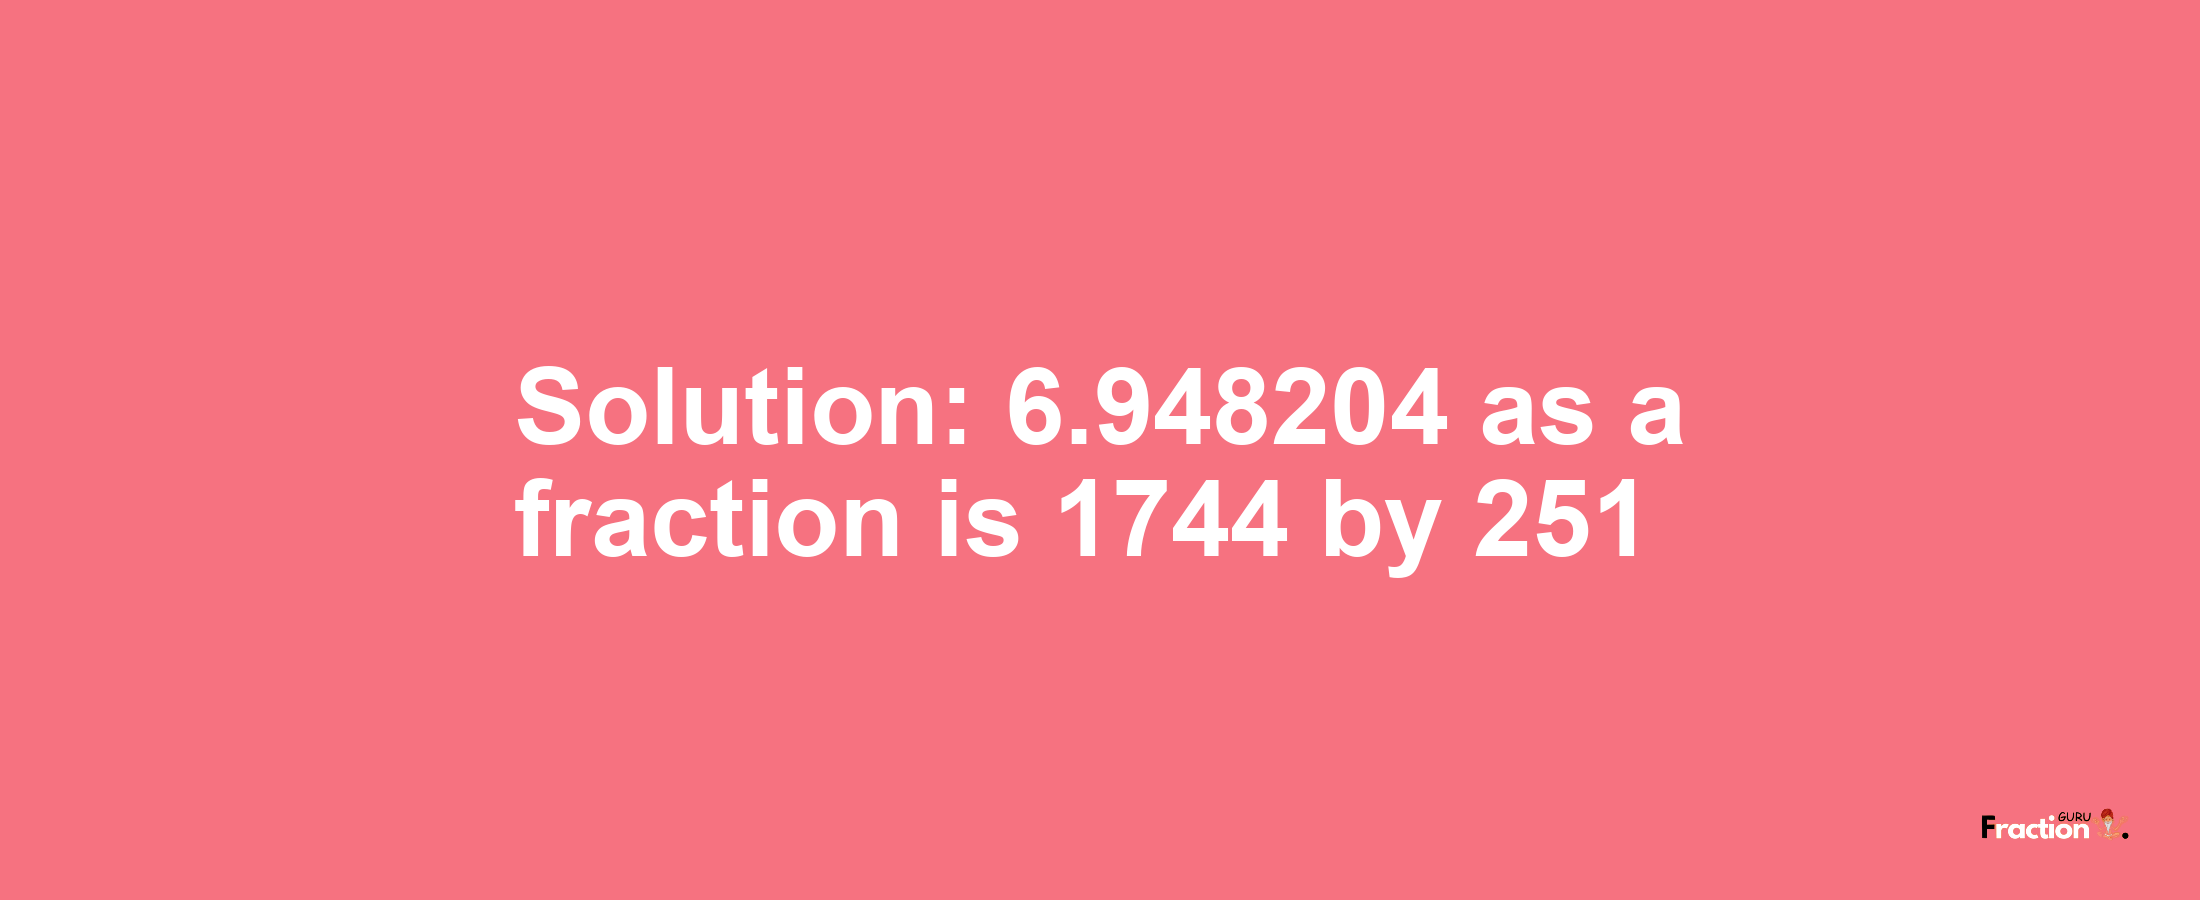 Solution:6.948204 as a fraction is 1744/251